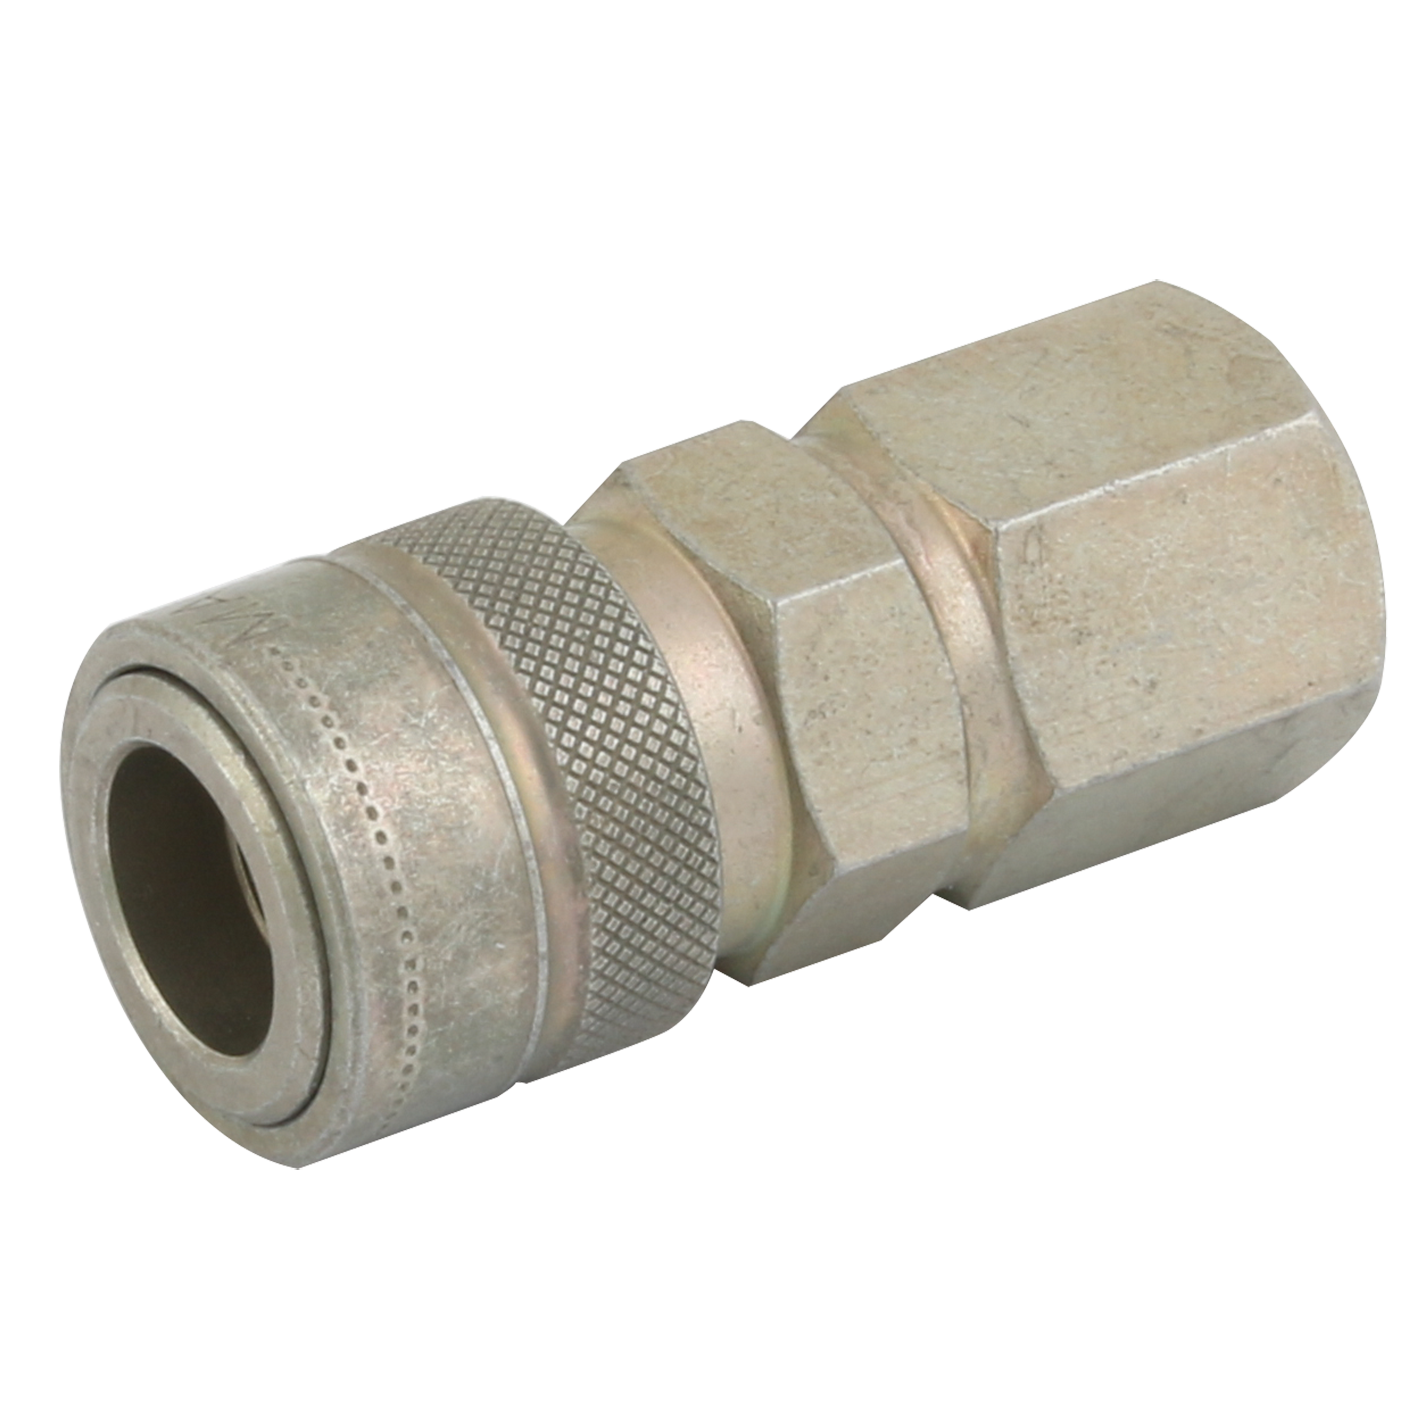 1/4" BSP Female Hydraulic Quick Release Coupling